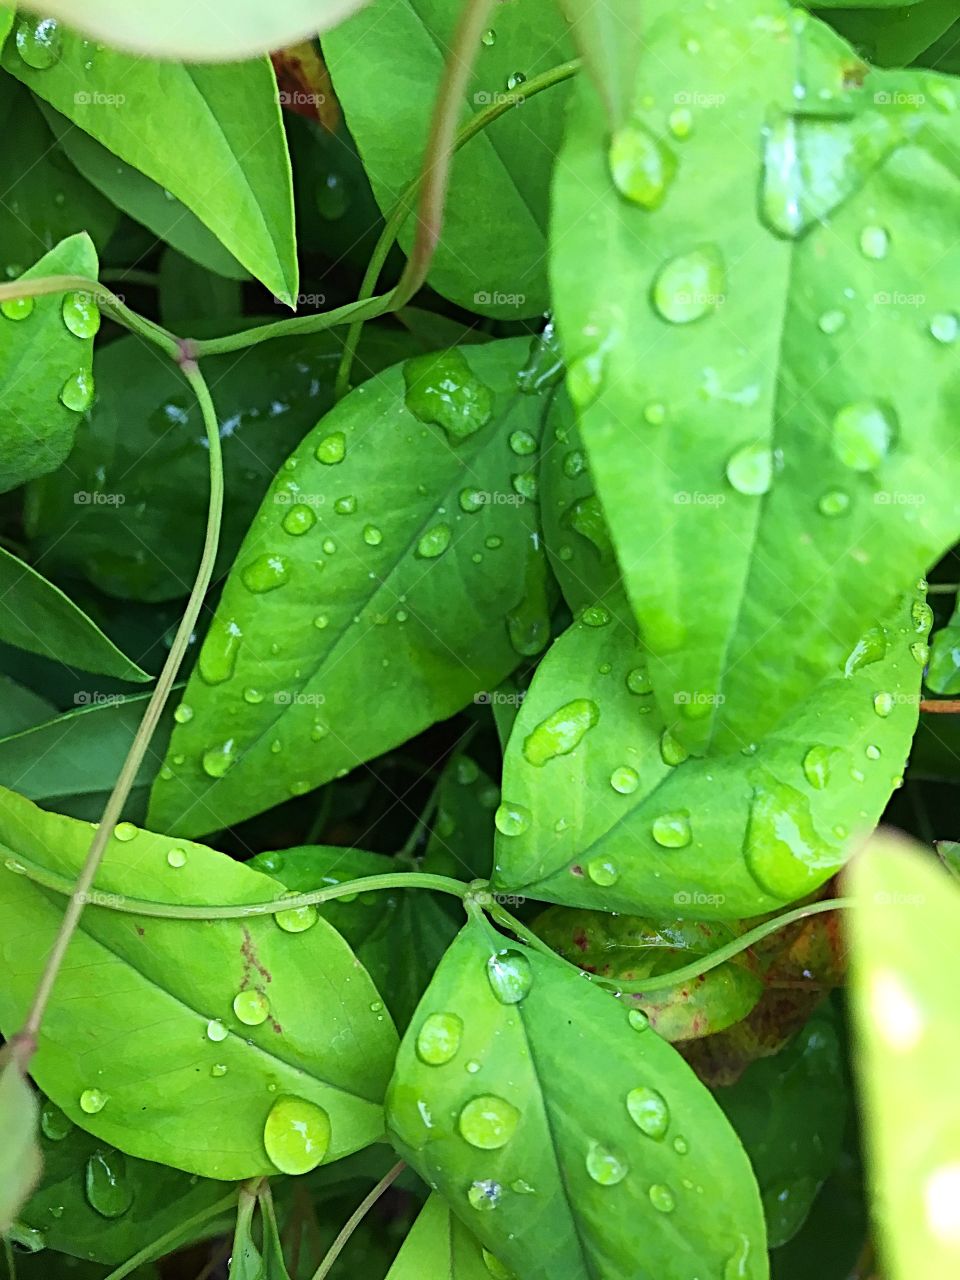 Perfect sitting droplets on the leaves 